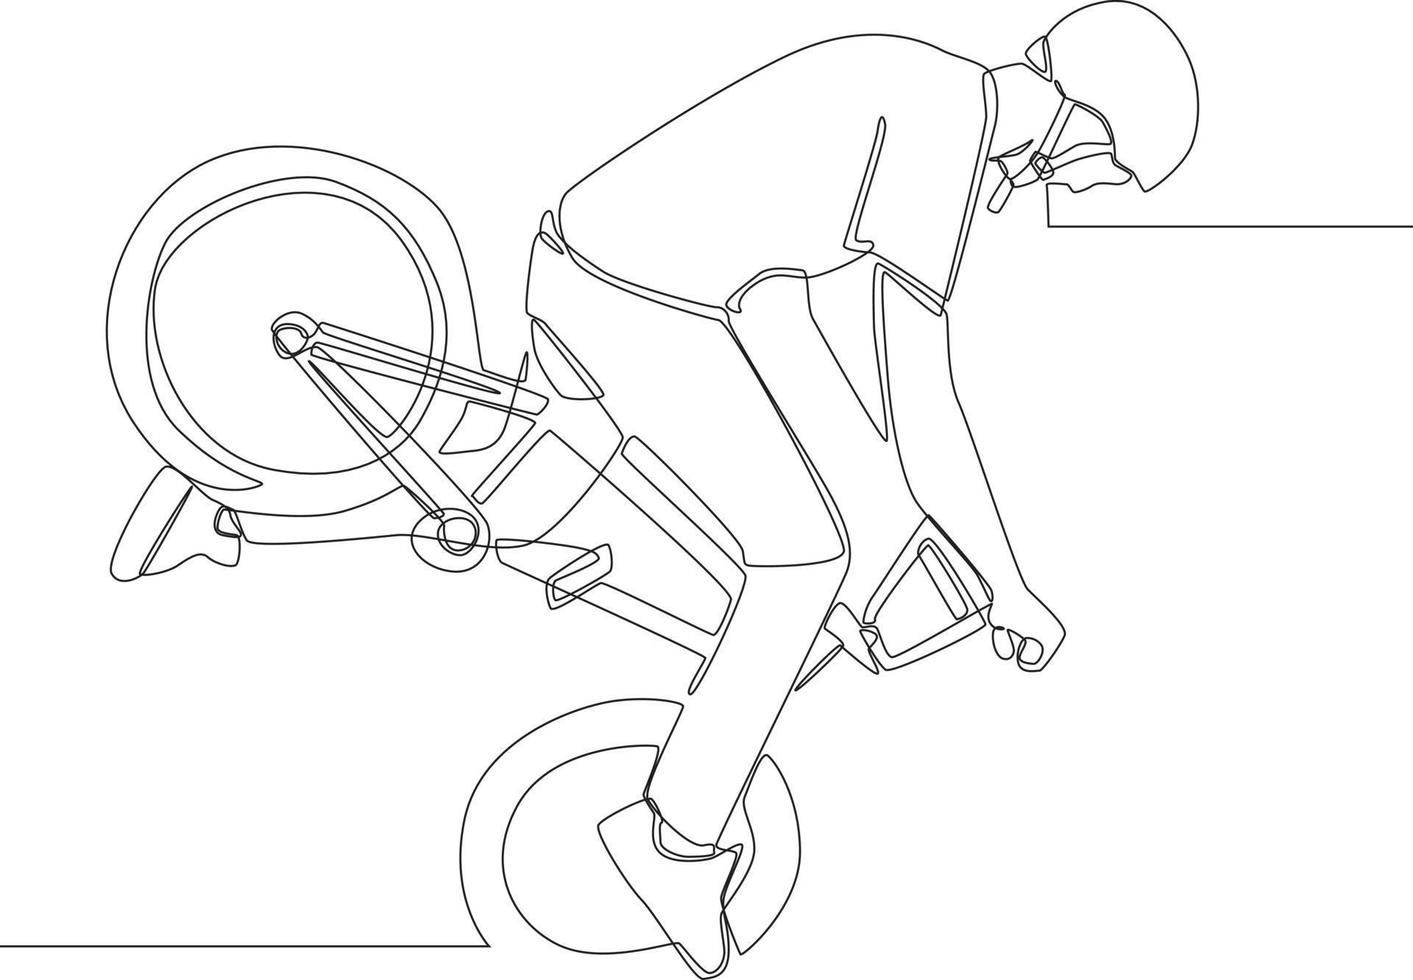 Simple continuous line drawing young bicycle rider perform freestyle trick on street. Vector illustration.